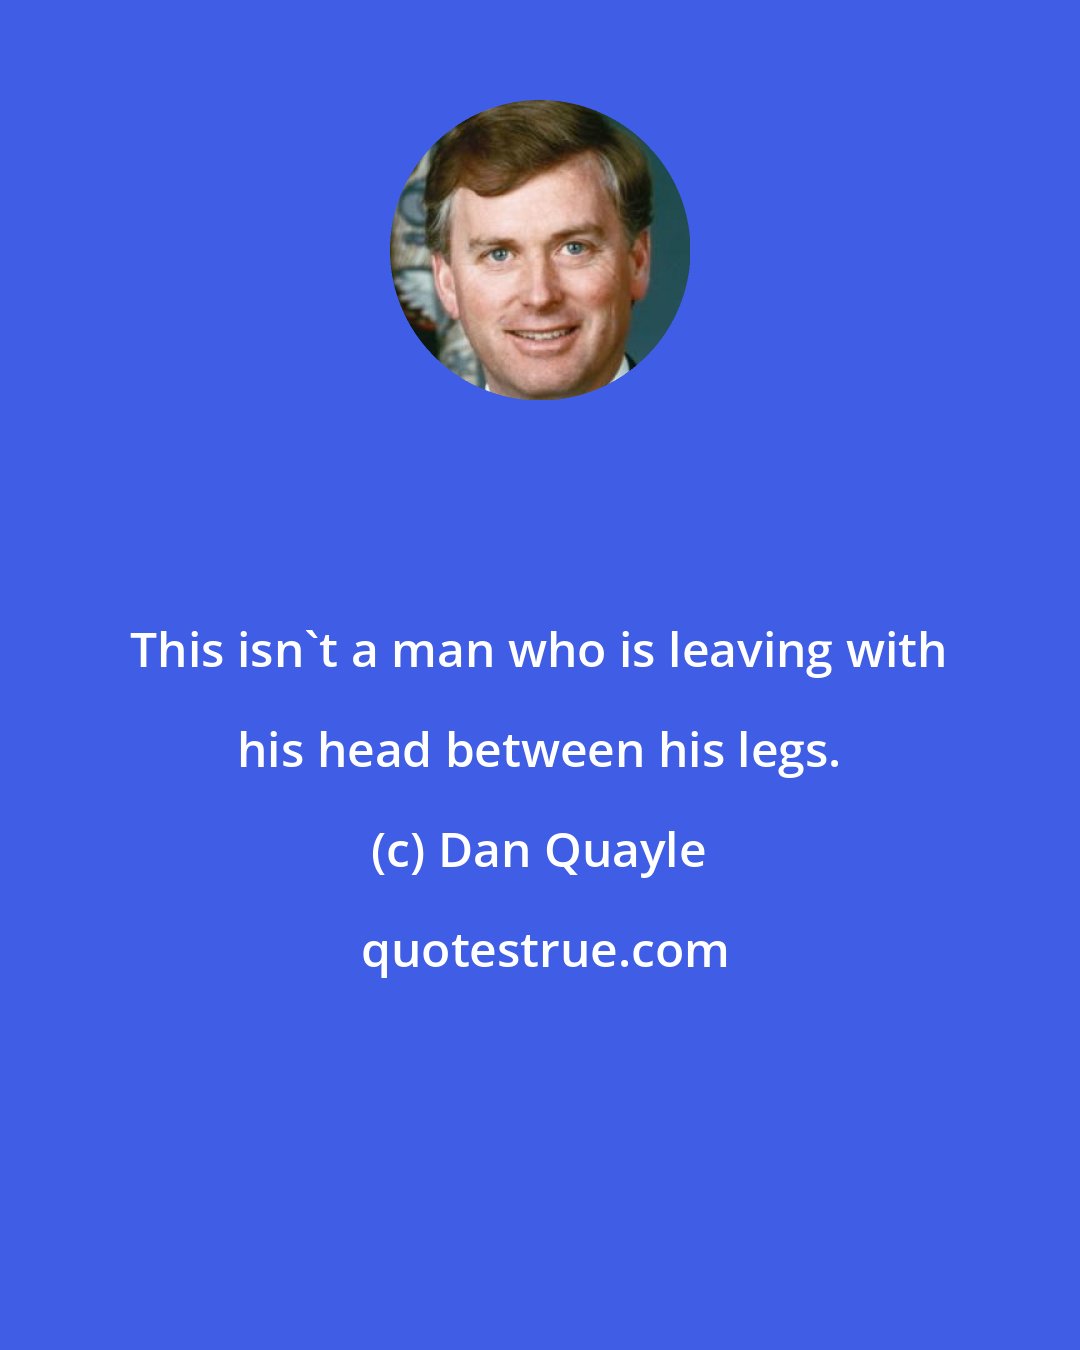 Dan Quayle: This isn't a man who is leaving with his head between his legs.